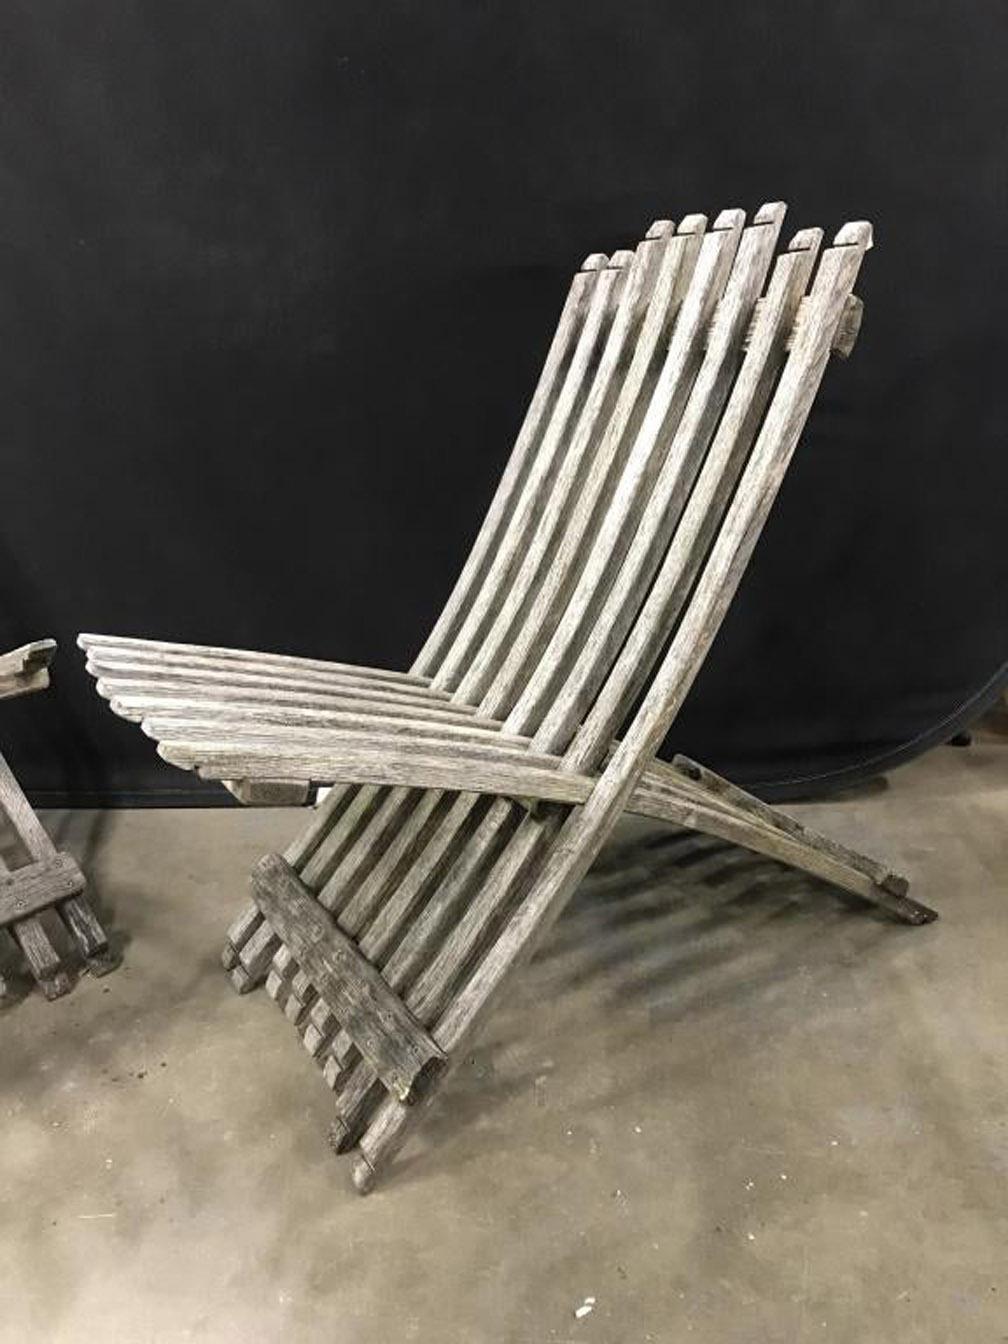 Pair of Teak Wood Folding Lounging Deck Chairs In Good Condition For Sale In Sheffield, MA